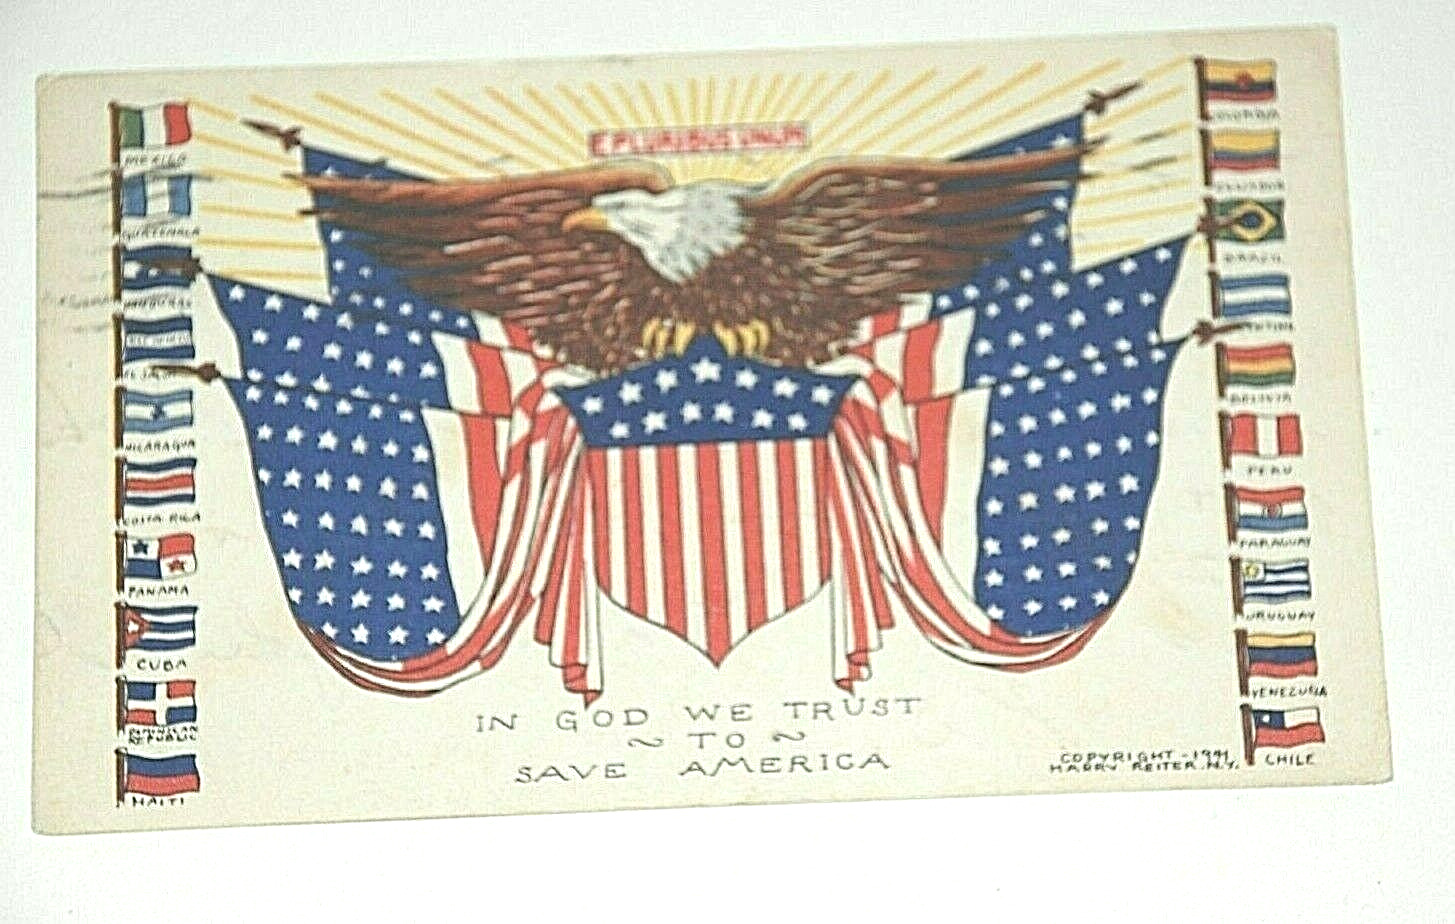 WWII ERA Postcard In God We Trust to Save America Eagle & Allied Americas Flags